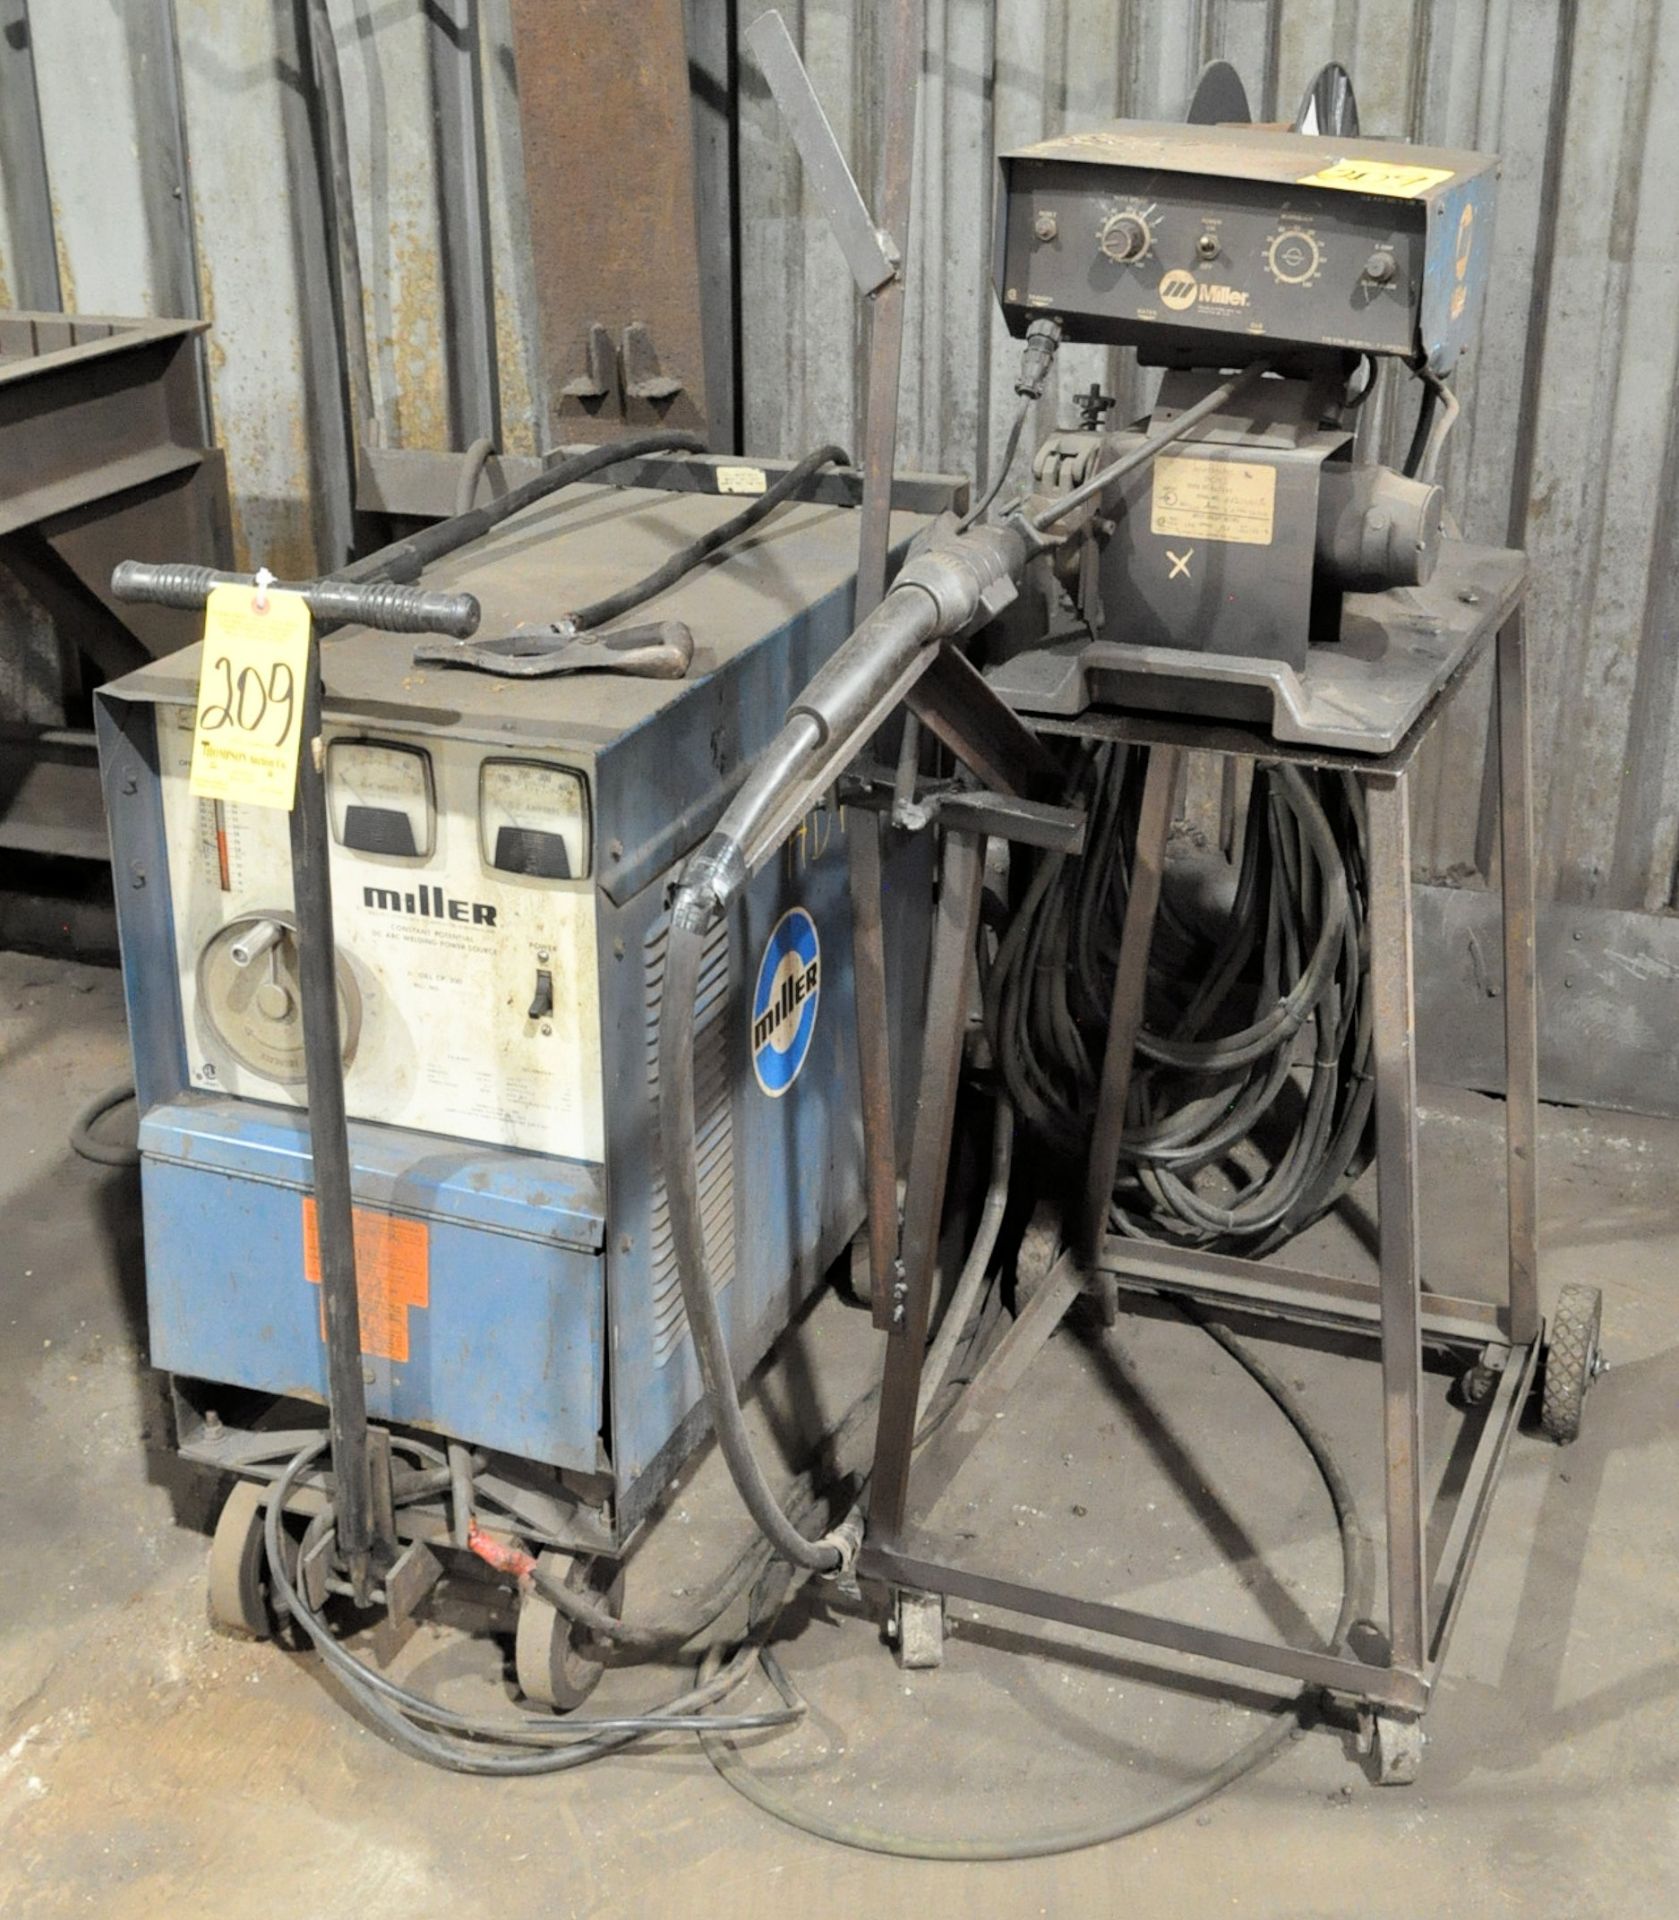 Miller CP-300, 300-Amp Capacity CP DC Arc Welding Power Source, S/n JB566350, with Leads, on Wheels,